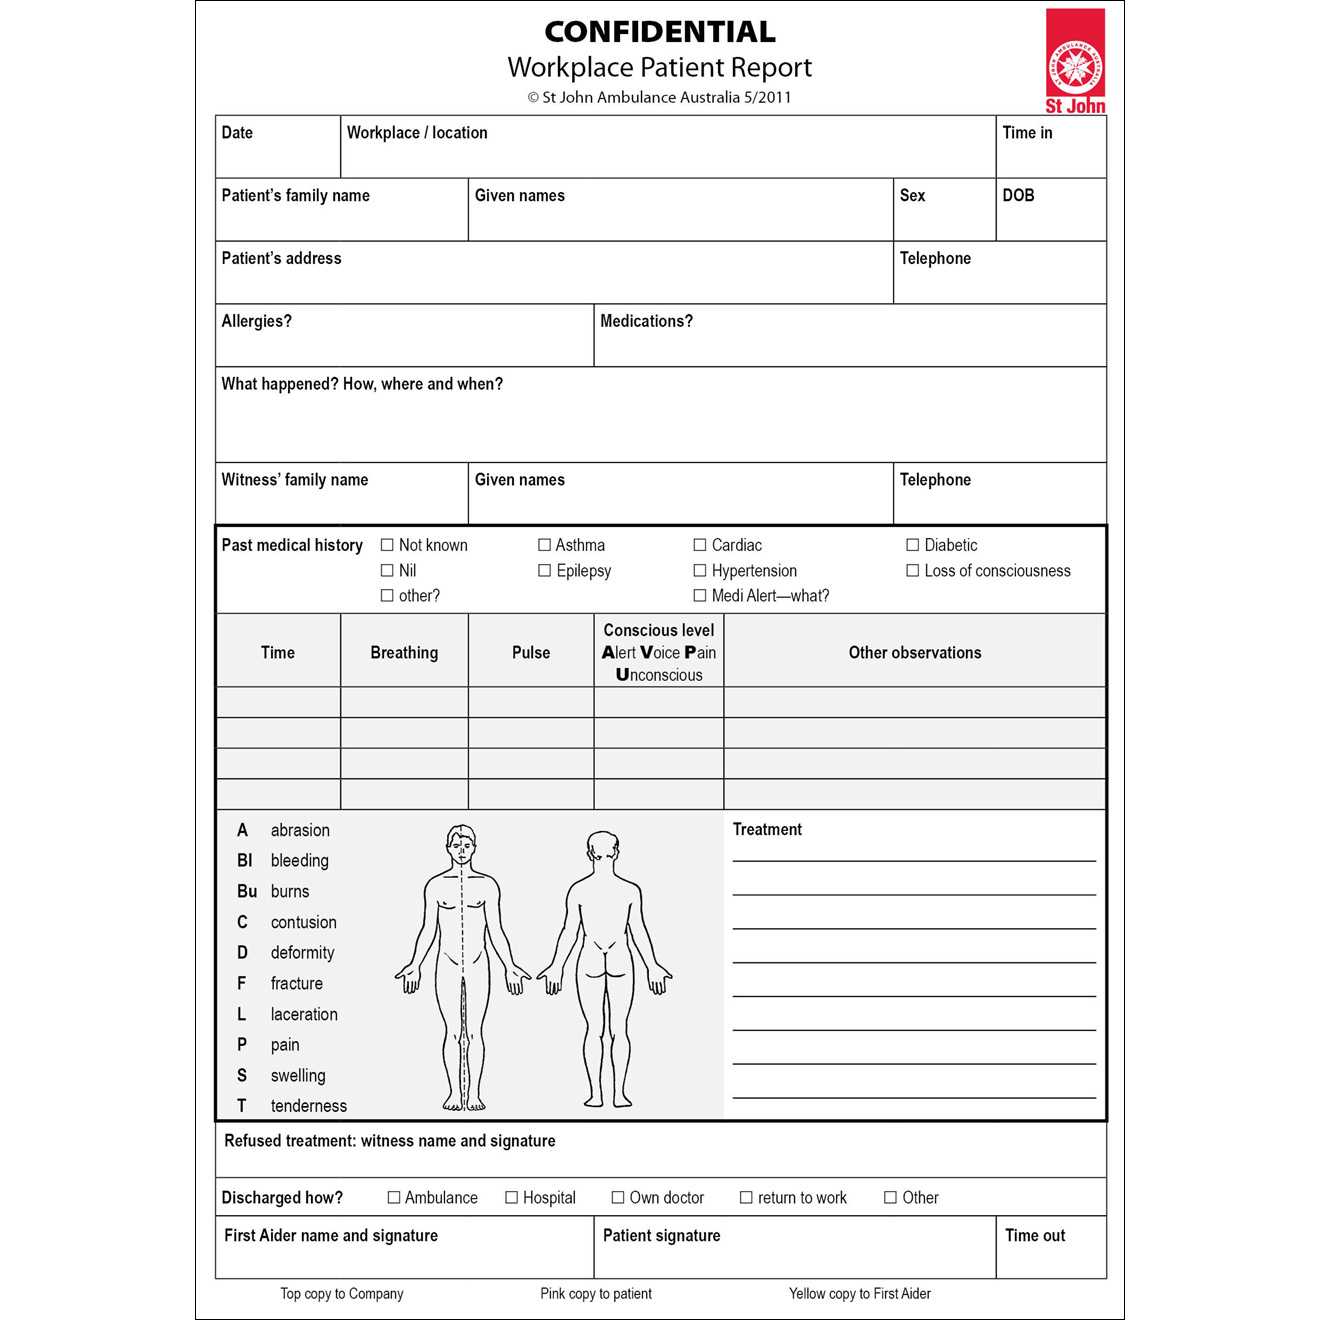 First Aid Incident Report Form - The Guide Ways Throughout First Aid Incident Report Form Template